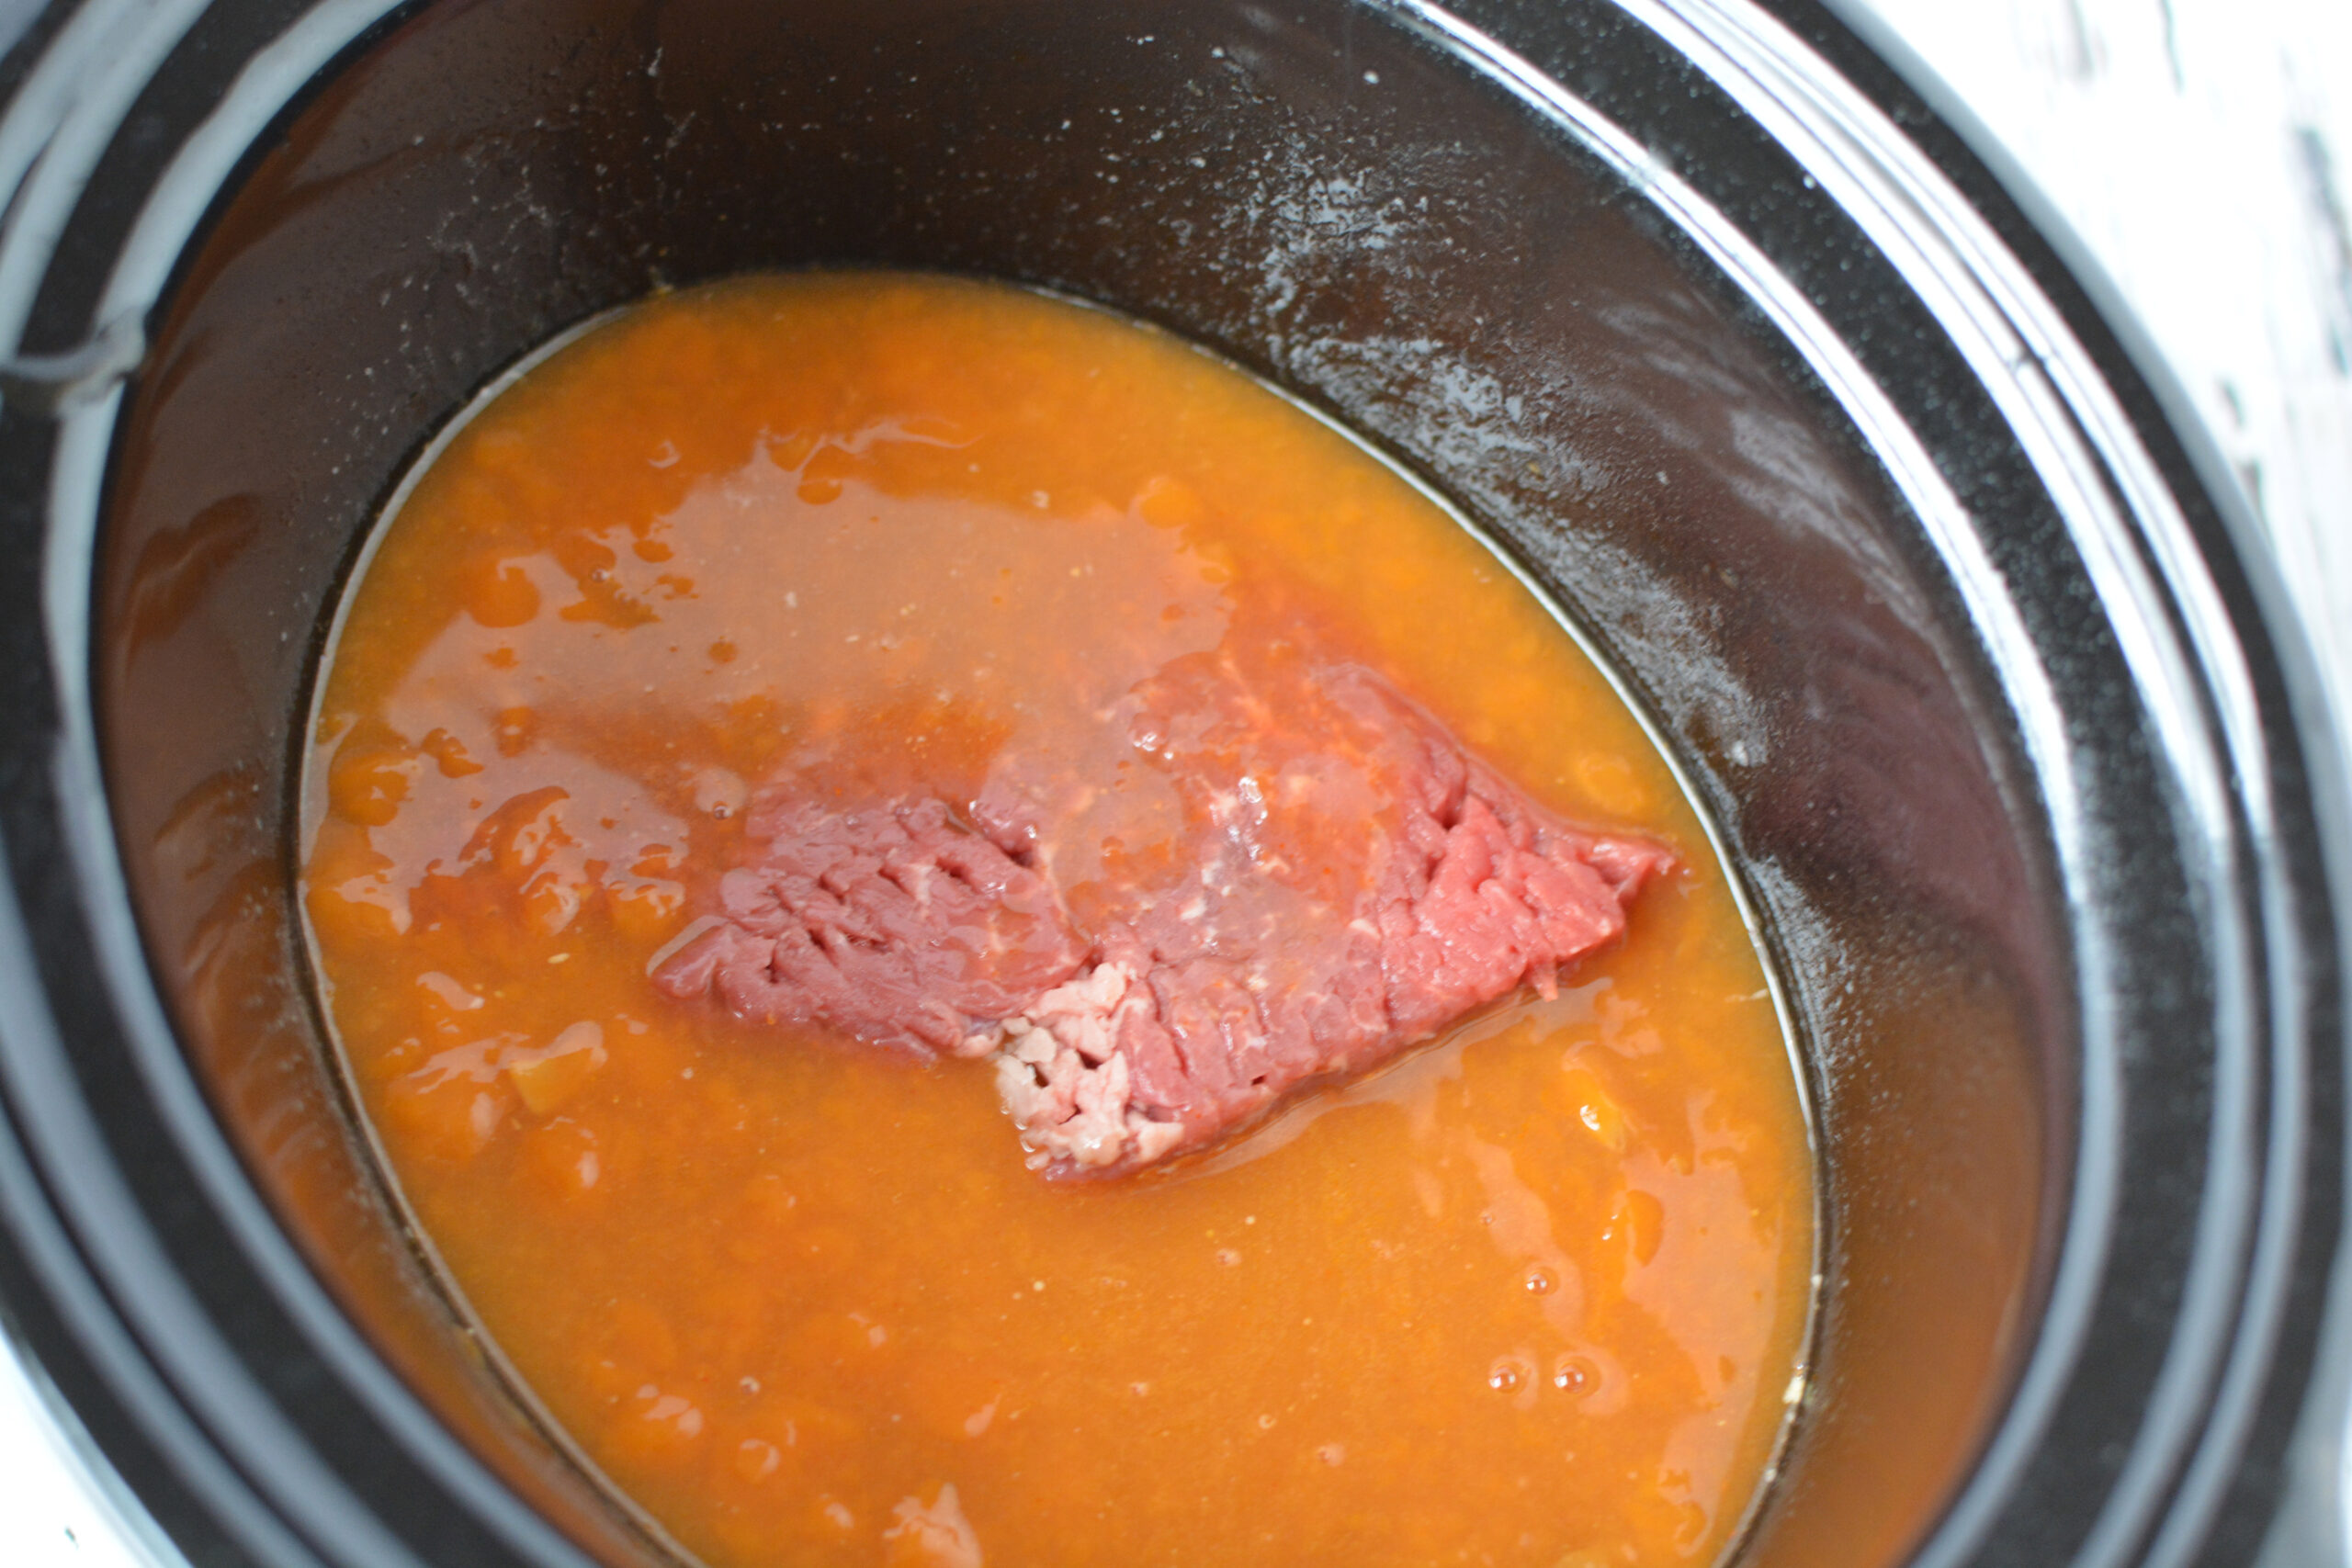 Add Cube Steak and Cover with Soup Mixture